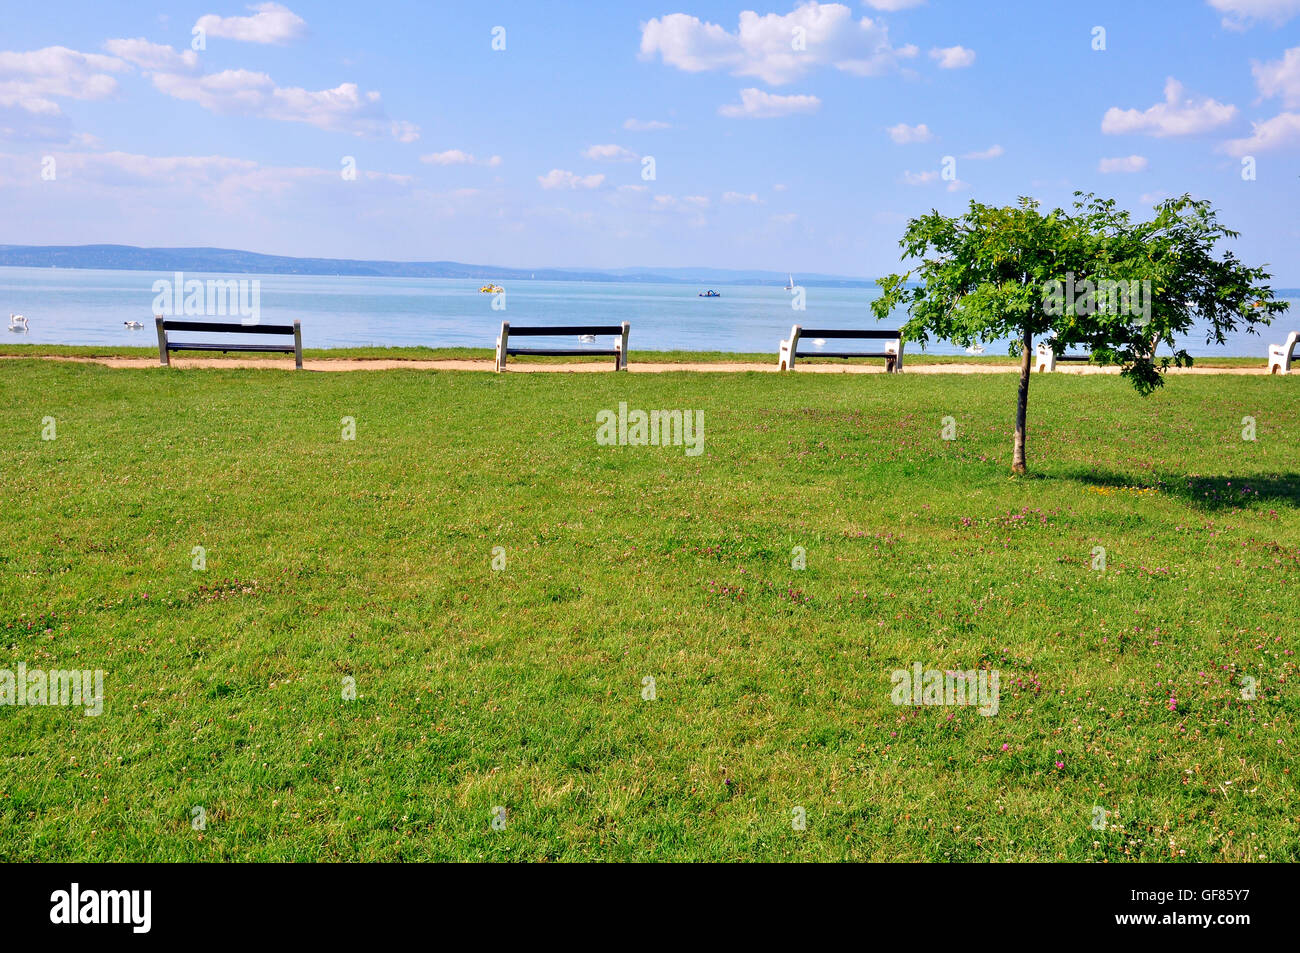 Benches and tree, Siofok resort Stock Photo